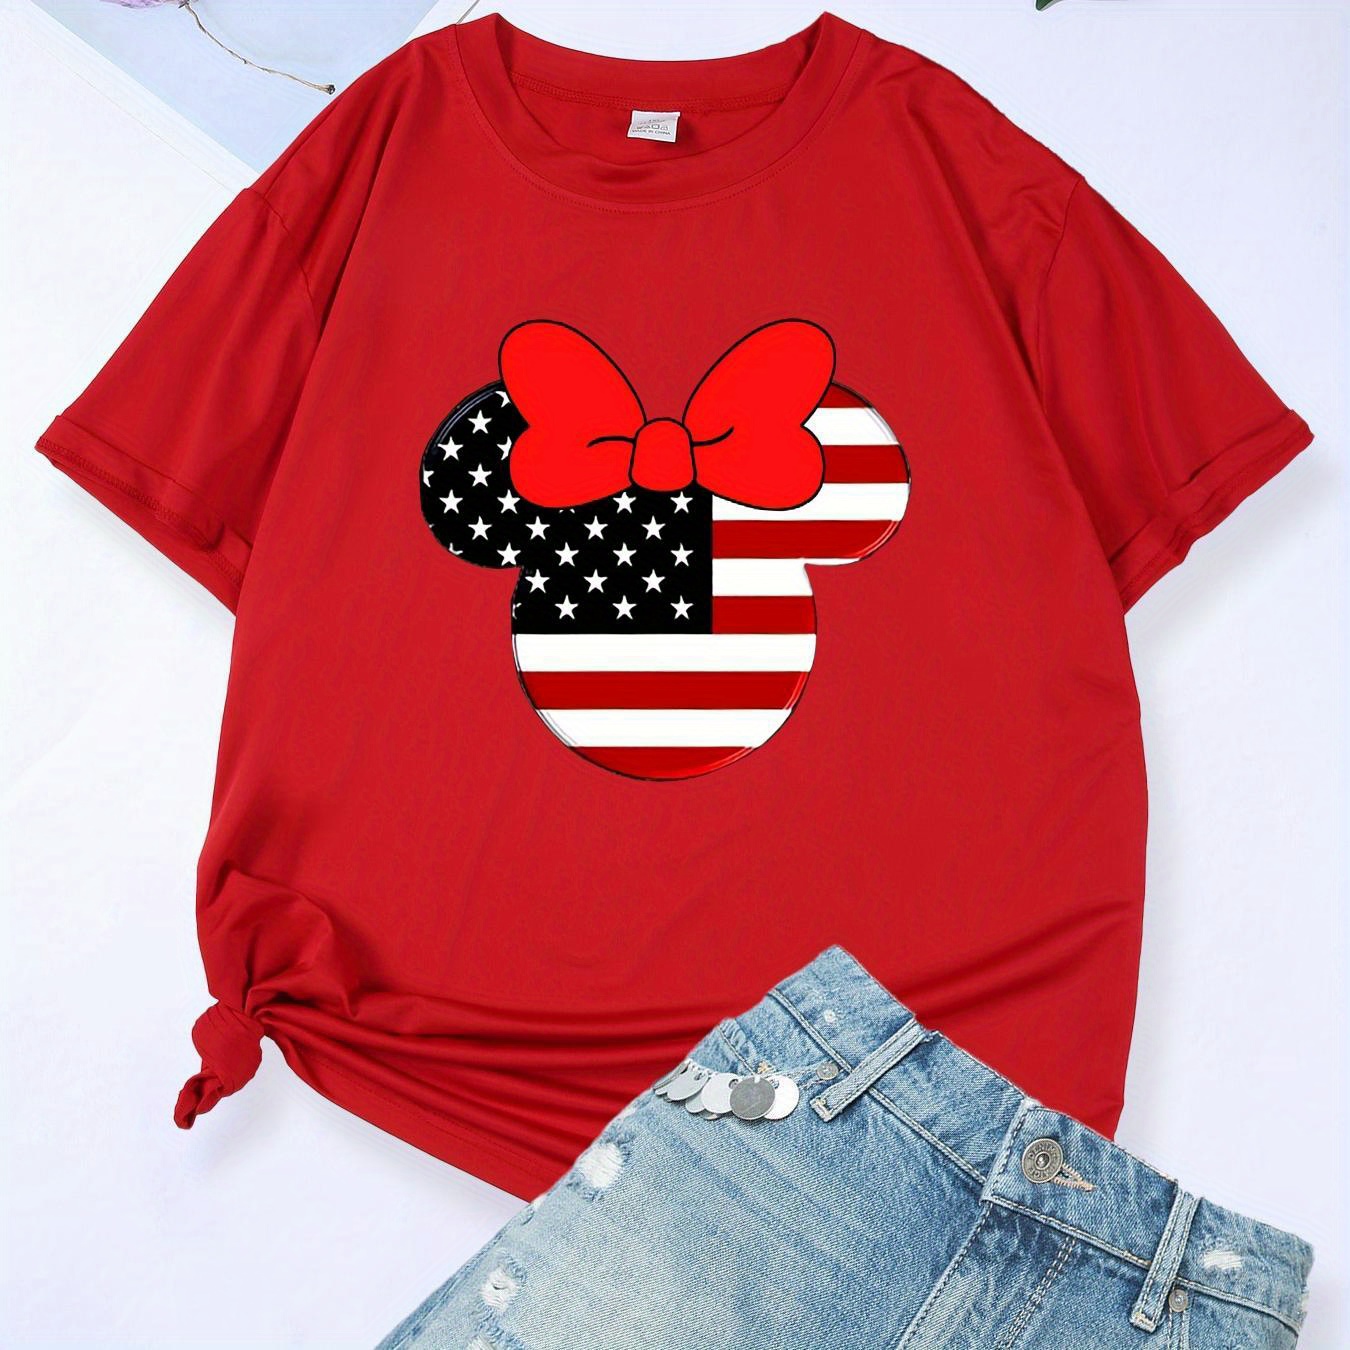 

Plus Size Mouse & Flag Print Casual T-shirt, Round Neck Short Sleeves Sports Tee, Women's Activewear For Independence Day